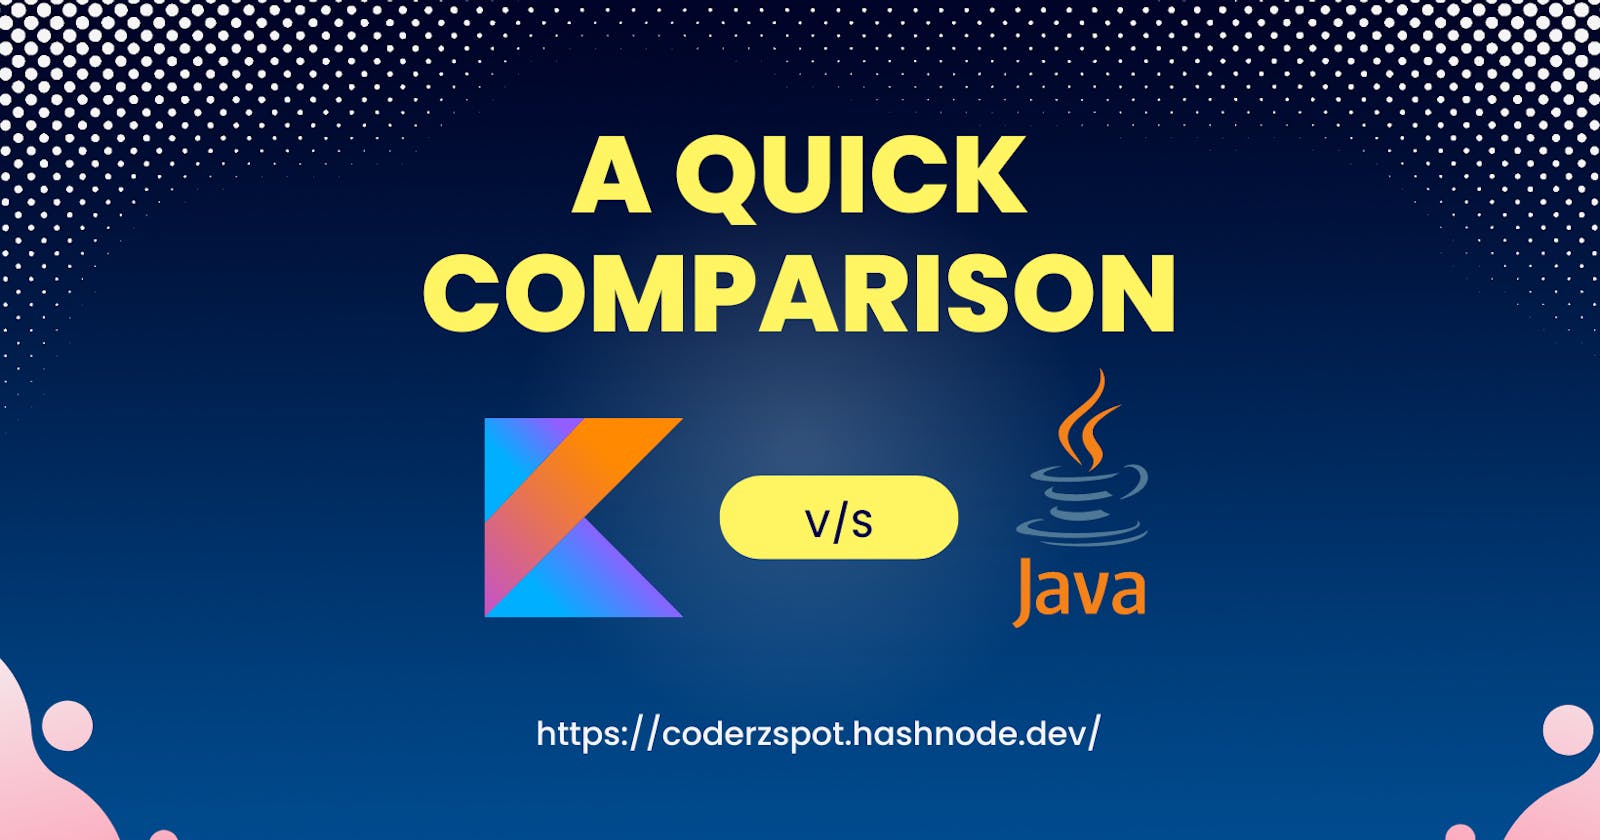 Kotlin or Java - Which is better for Android Development